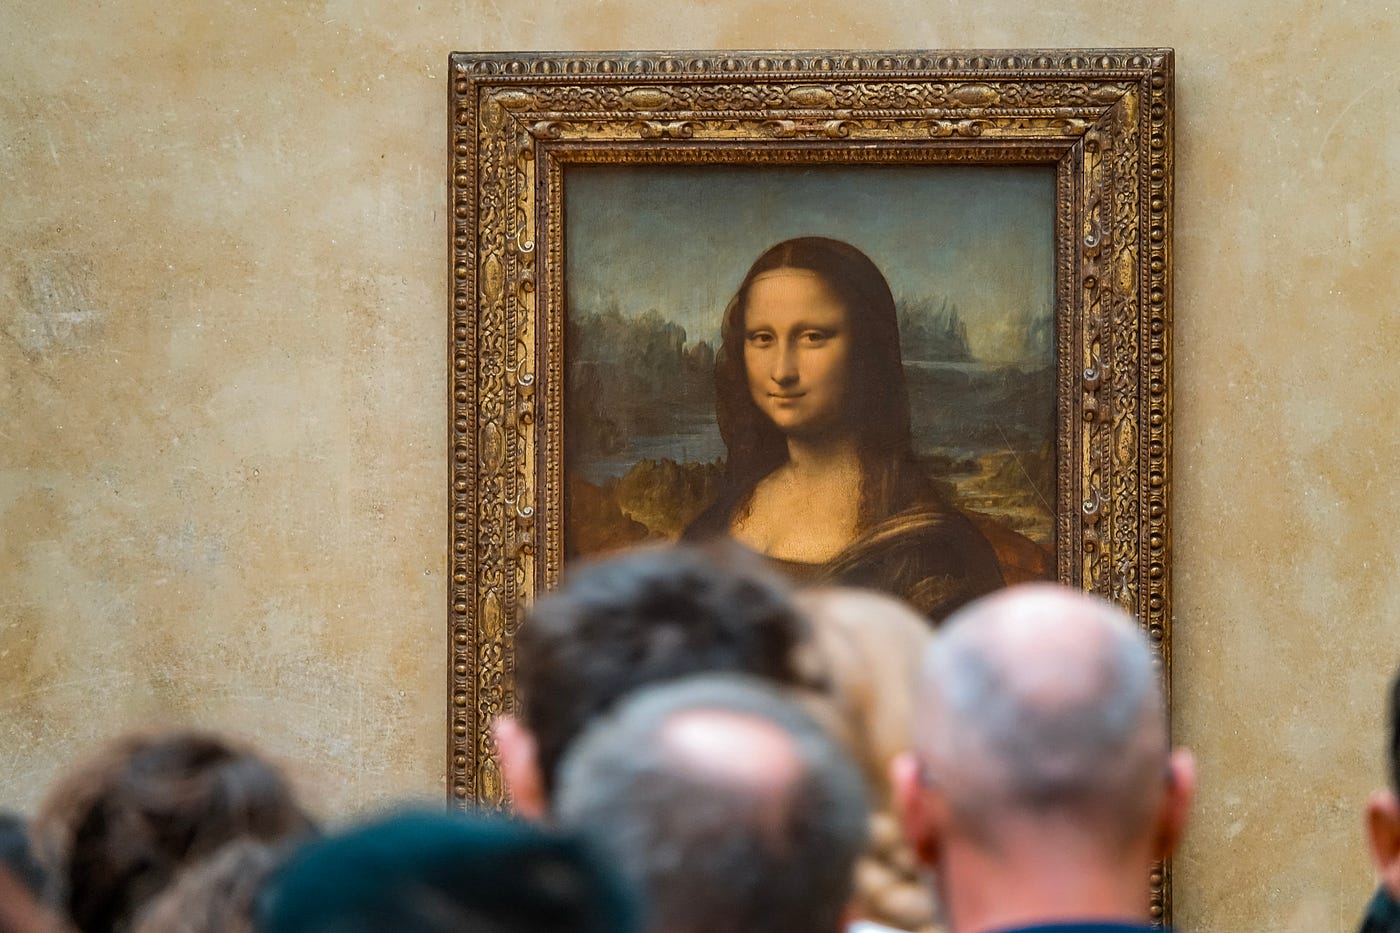 I was this close to the Mona Lisa and I didn't feel the need to